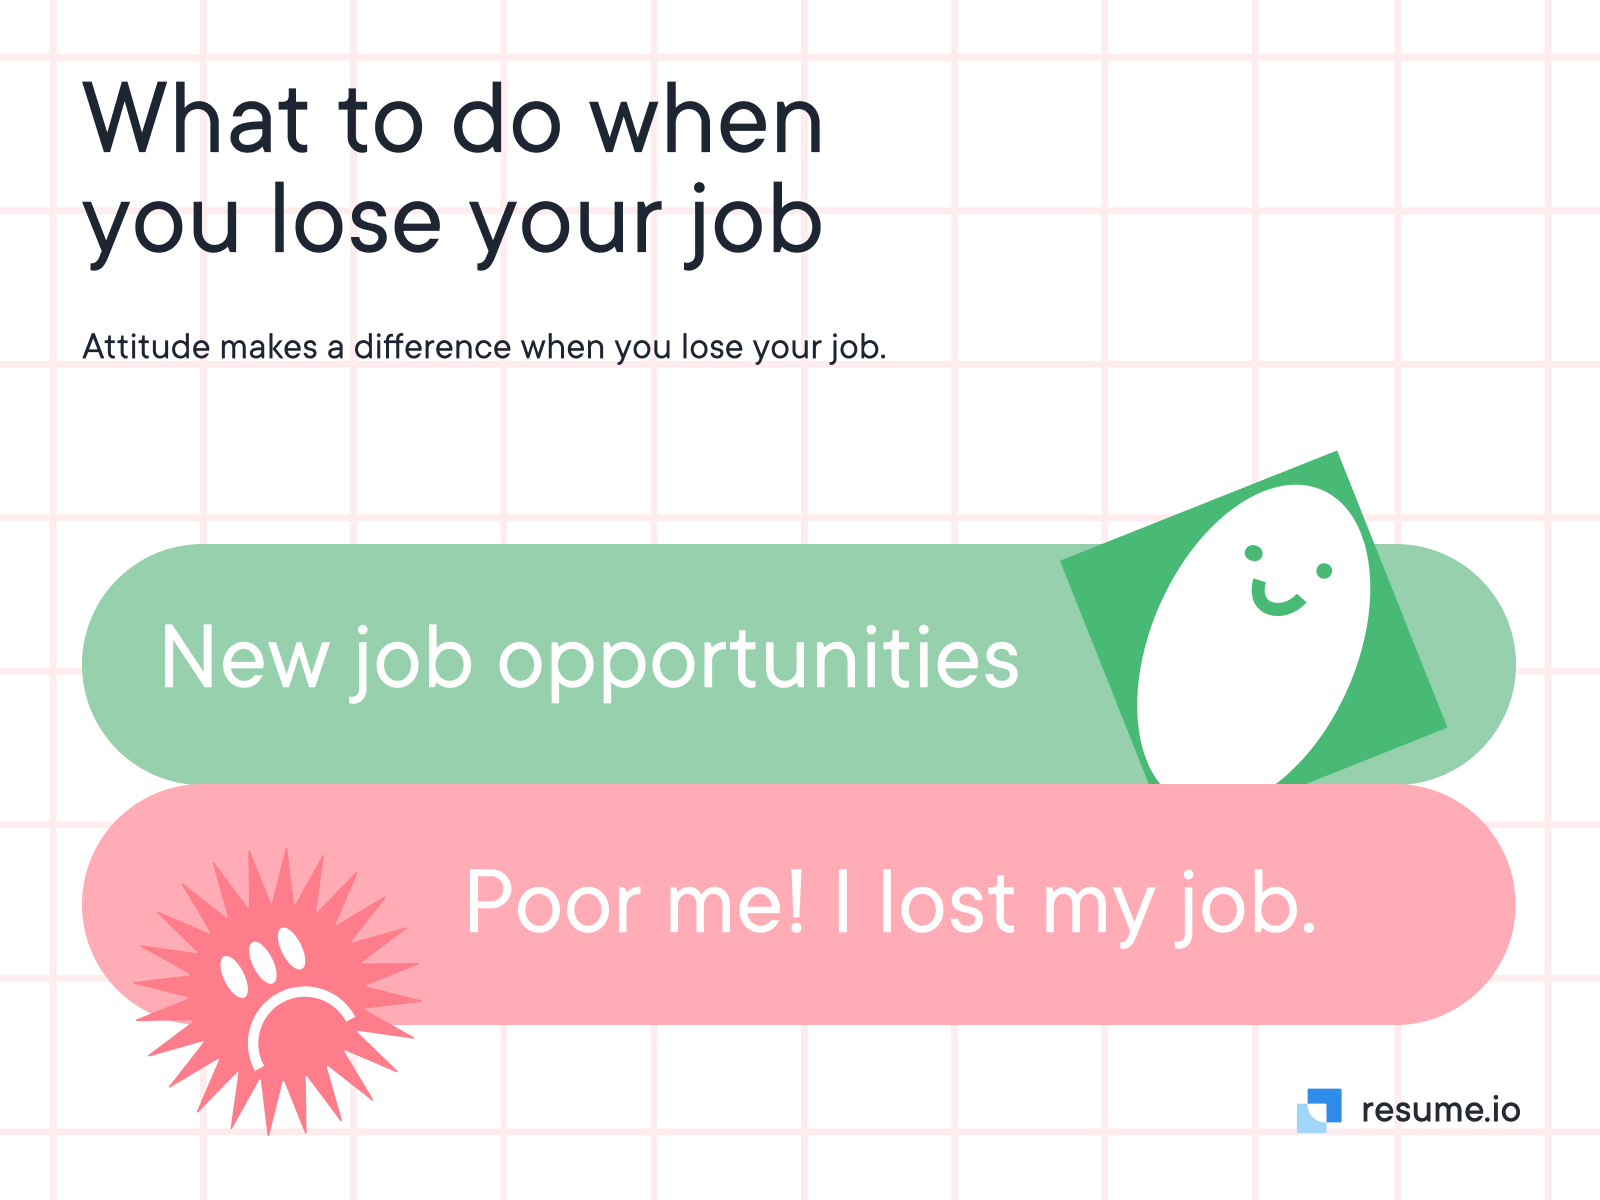 What to do when you lose your job